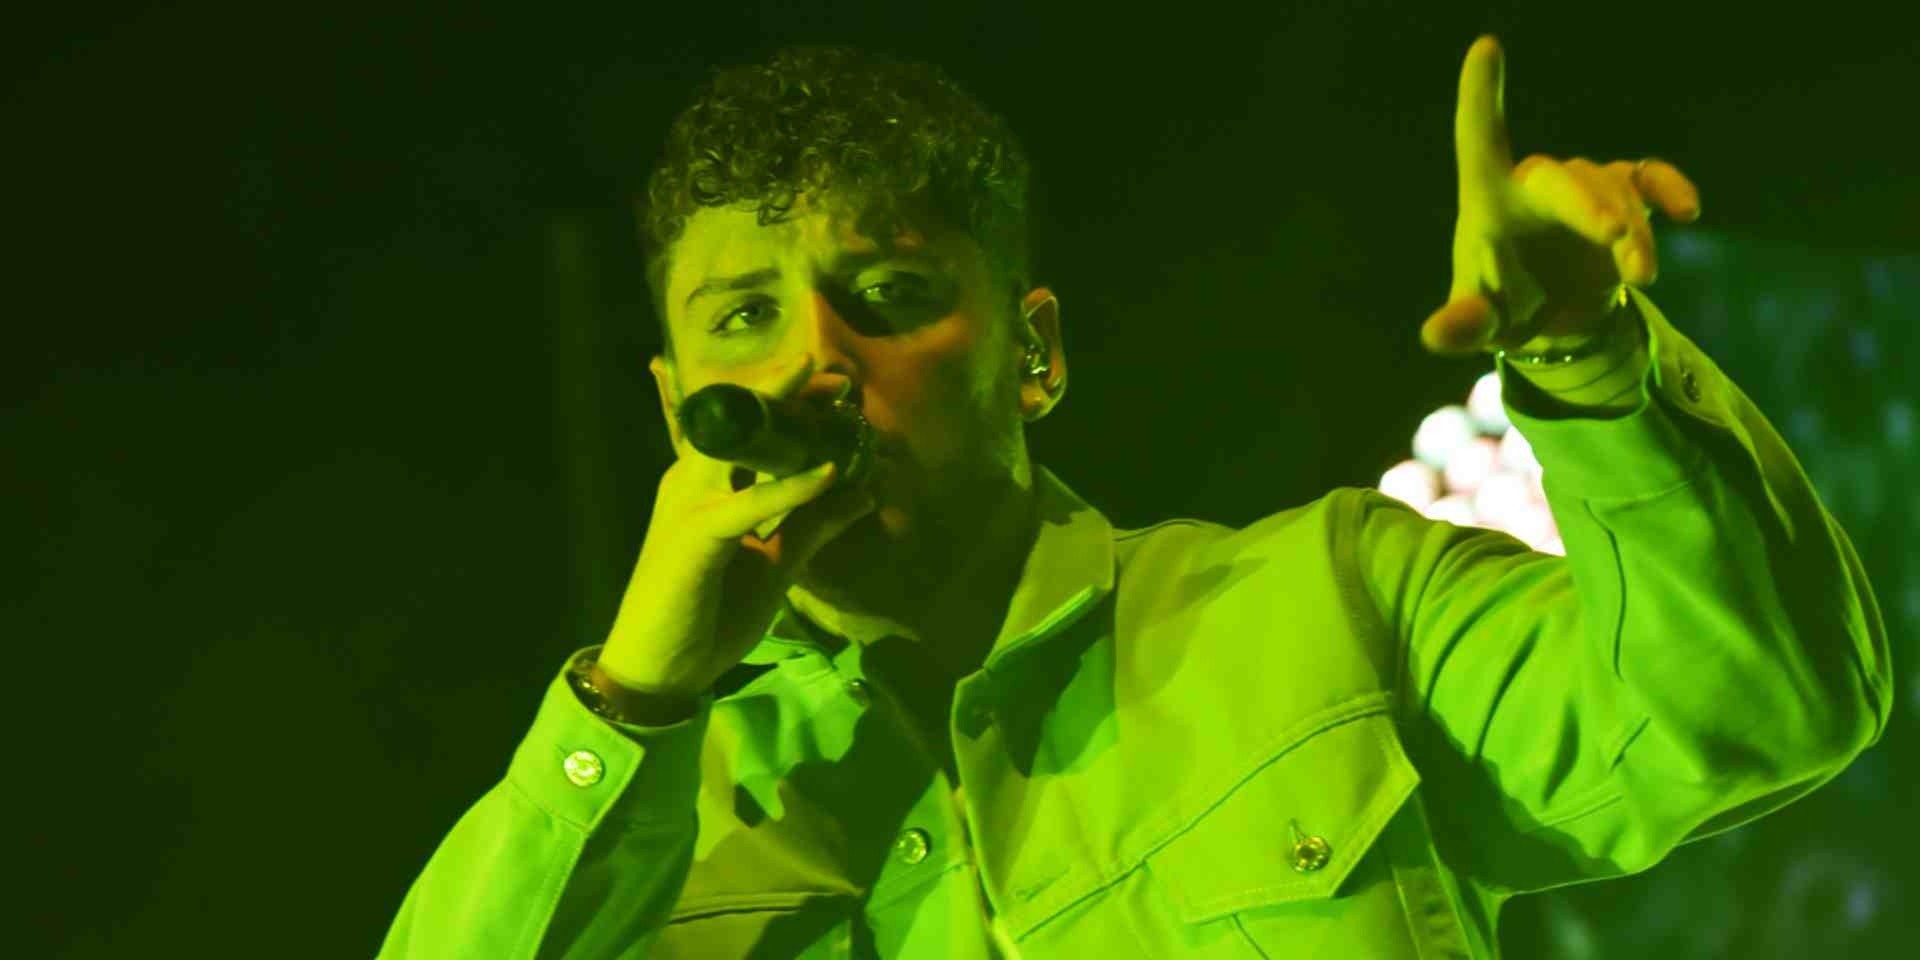 Bazzi proves he is one of pop's brightest stars at debut Singapore show – gig report